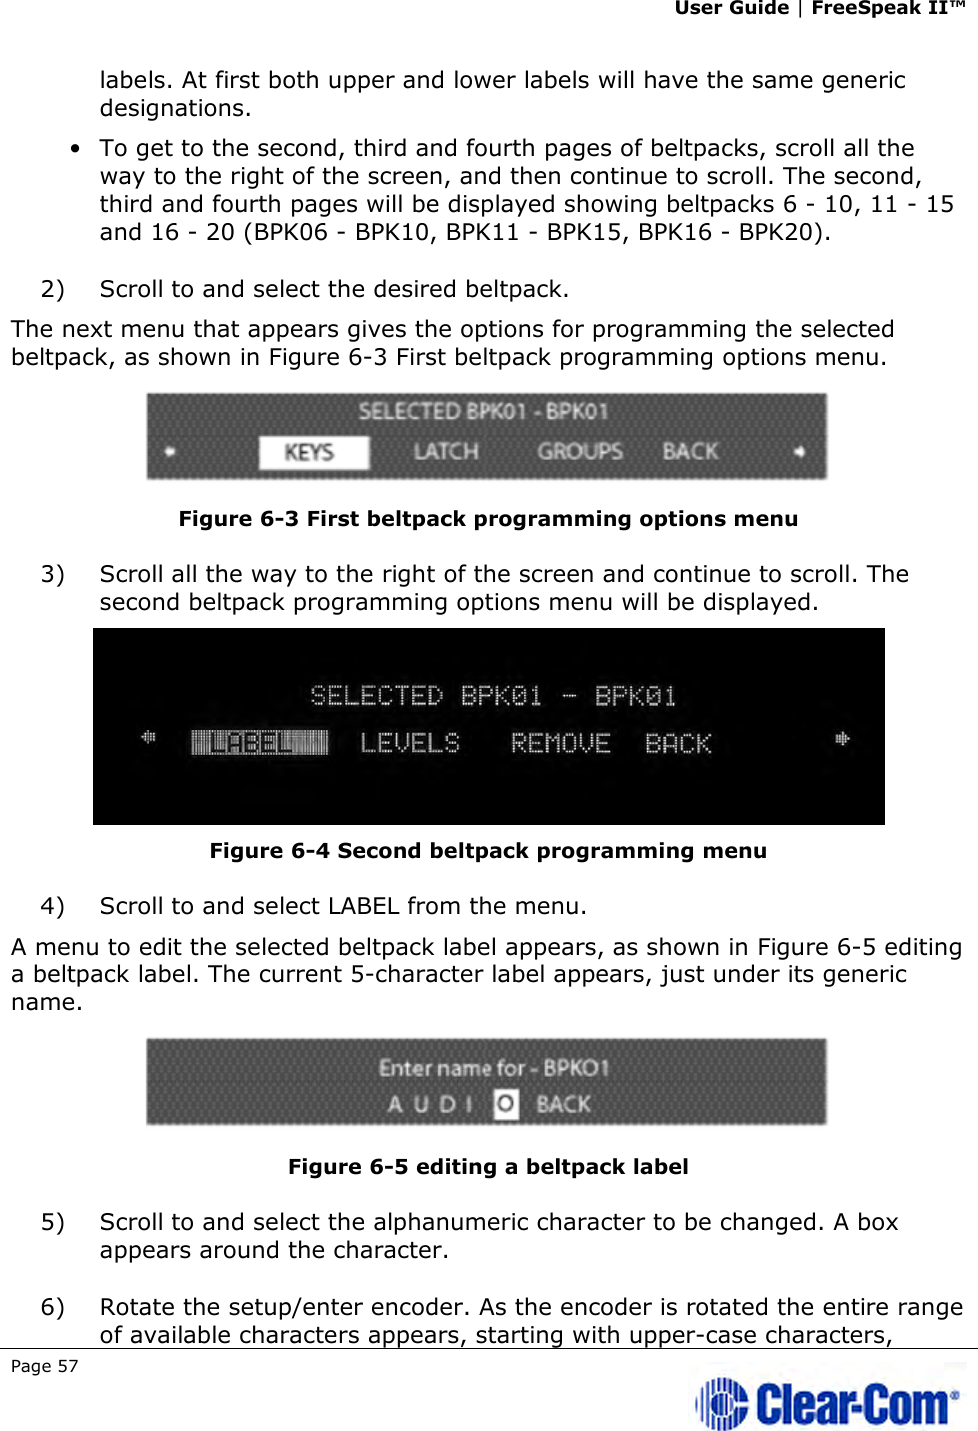 User Guide | FreeSpeak II™  Page 57   labels. At first both upper and lower labels will have the same generic designations. • To get to the second, third and fourth pages of beltpacks, scroll all the way to the right of the screen, and then continue to scroll. The second, third and fourth pages will be displayed showing beltpacks 6 - 10, 11 - 15 and 16 - 20 (BPK06 - BPK10, BPK11 - BPK15, BPK16 - BPK20). 2) Scroll to and select the desired beltpack.  The next menu that appears gives the options for programming the selected beltpack, as shown in Figure 6-3 First beltpack programming options menu.  Figure 6-3 First beltpack programming options menu 3) Scroll all the way to the right of the screen and continue to scroll. The second beltpack programming options menu will be displayed.  Figure 6-4 Second beltpack programming menu 4) Scroll to and select LABEL from the menu.  A menu to edit the selected beltpack label appears, as shown in Figure 6-5 editing a beltpack label. The current 5-character label appears, just under its generic name.  Figure 6-5 editing a beltpack label 5) Scroll to and select the alphanumeric character to be changed. A box appears around the character. 6) Rotate the setup/enter encoder. As the encoder is rotated the entire range of available characters appears, starting with upper-case characters, 